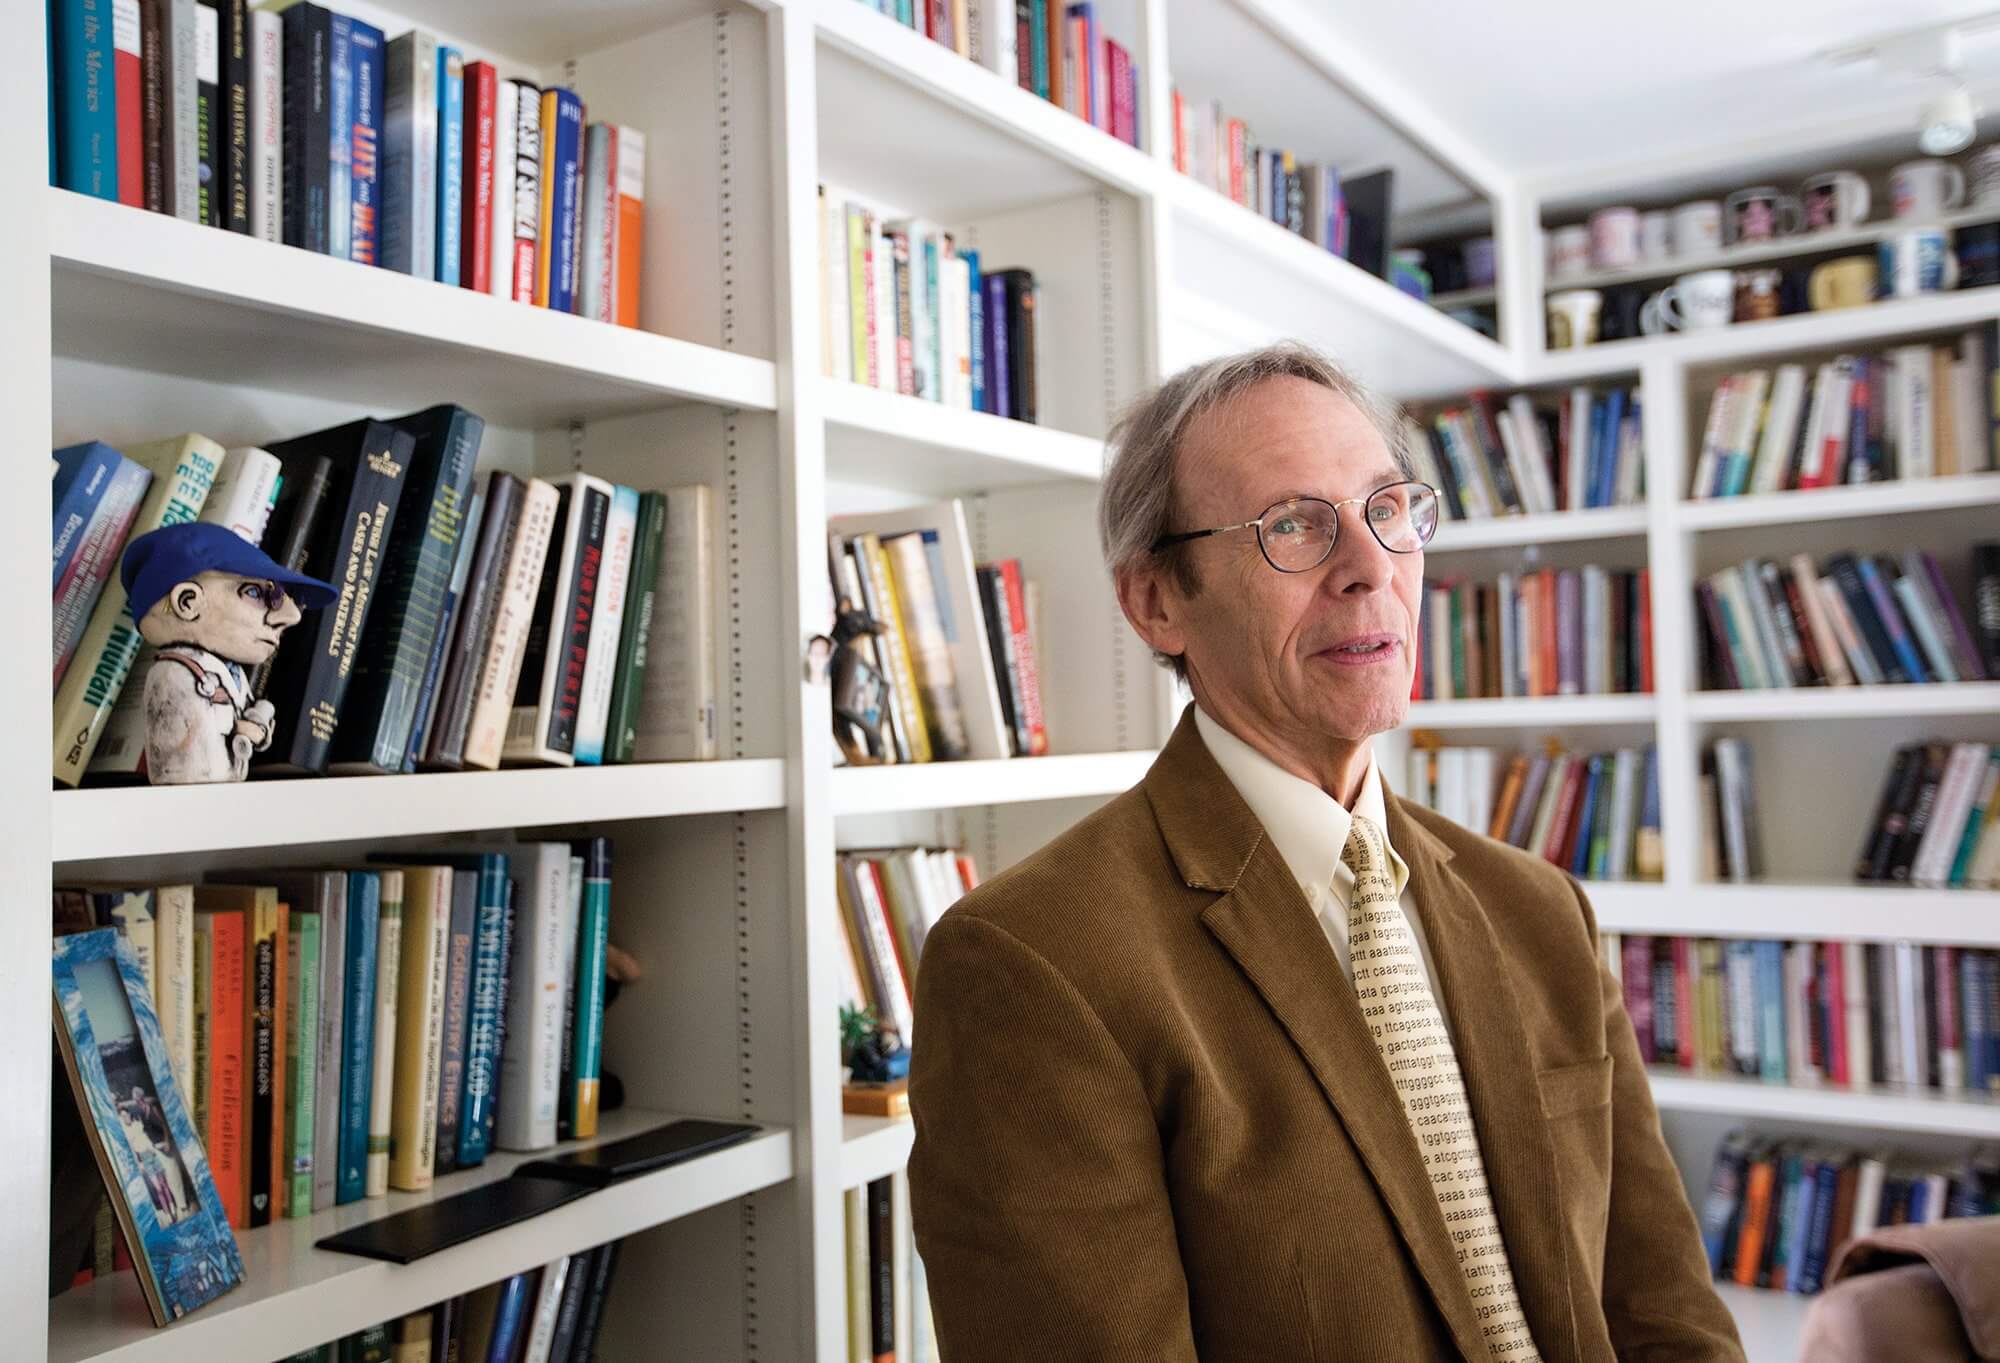 Sheldon Rubenfeld, M.D., director of the Center for Medicine After the Holocaust at his home library.